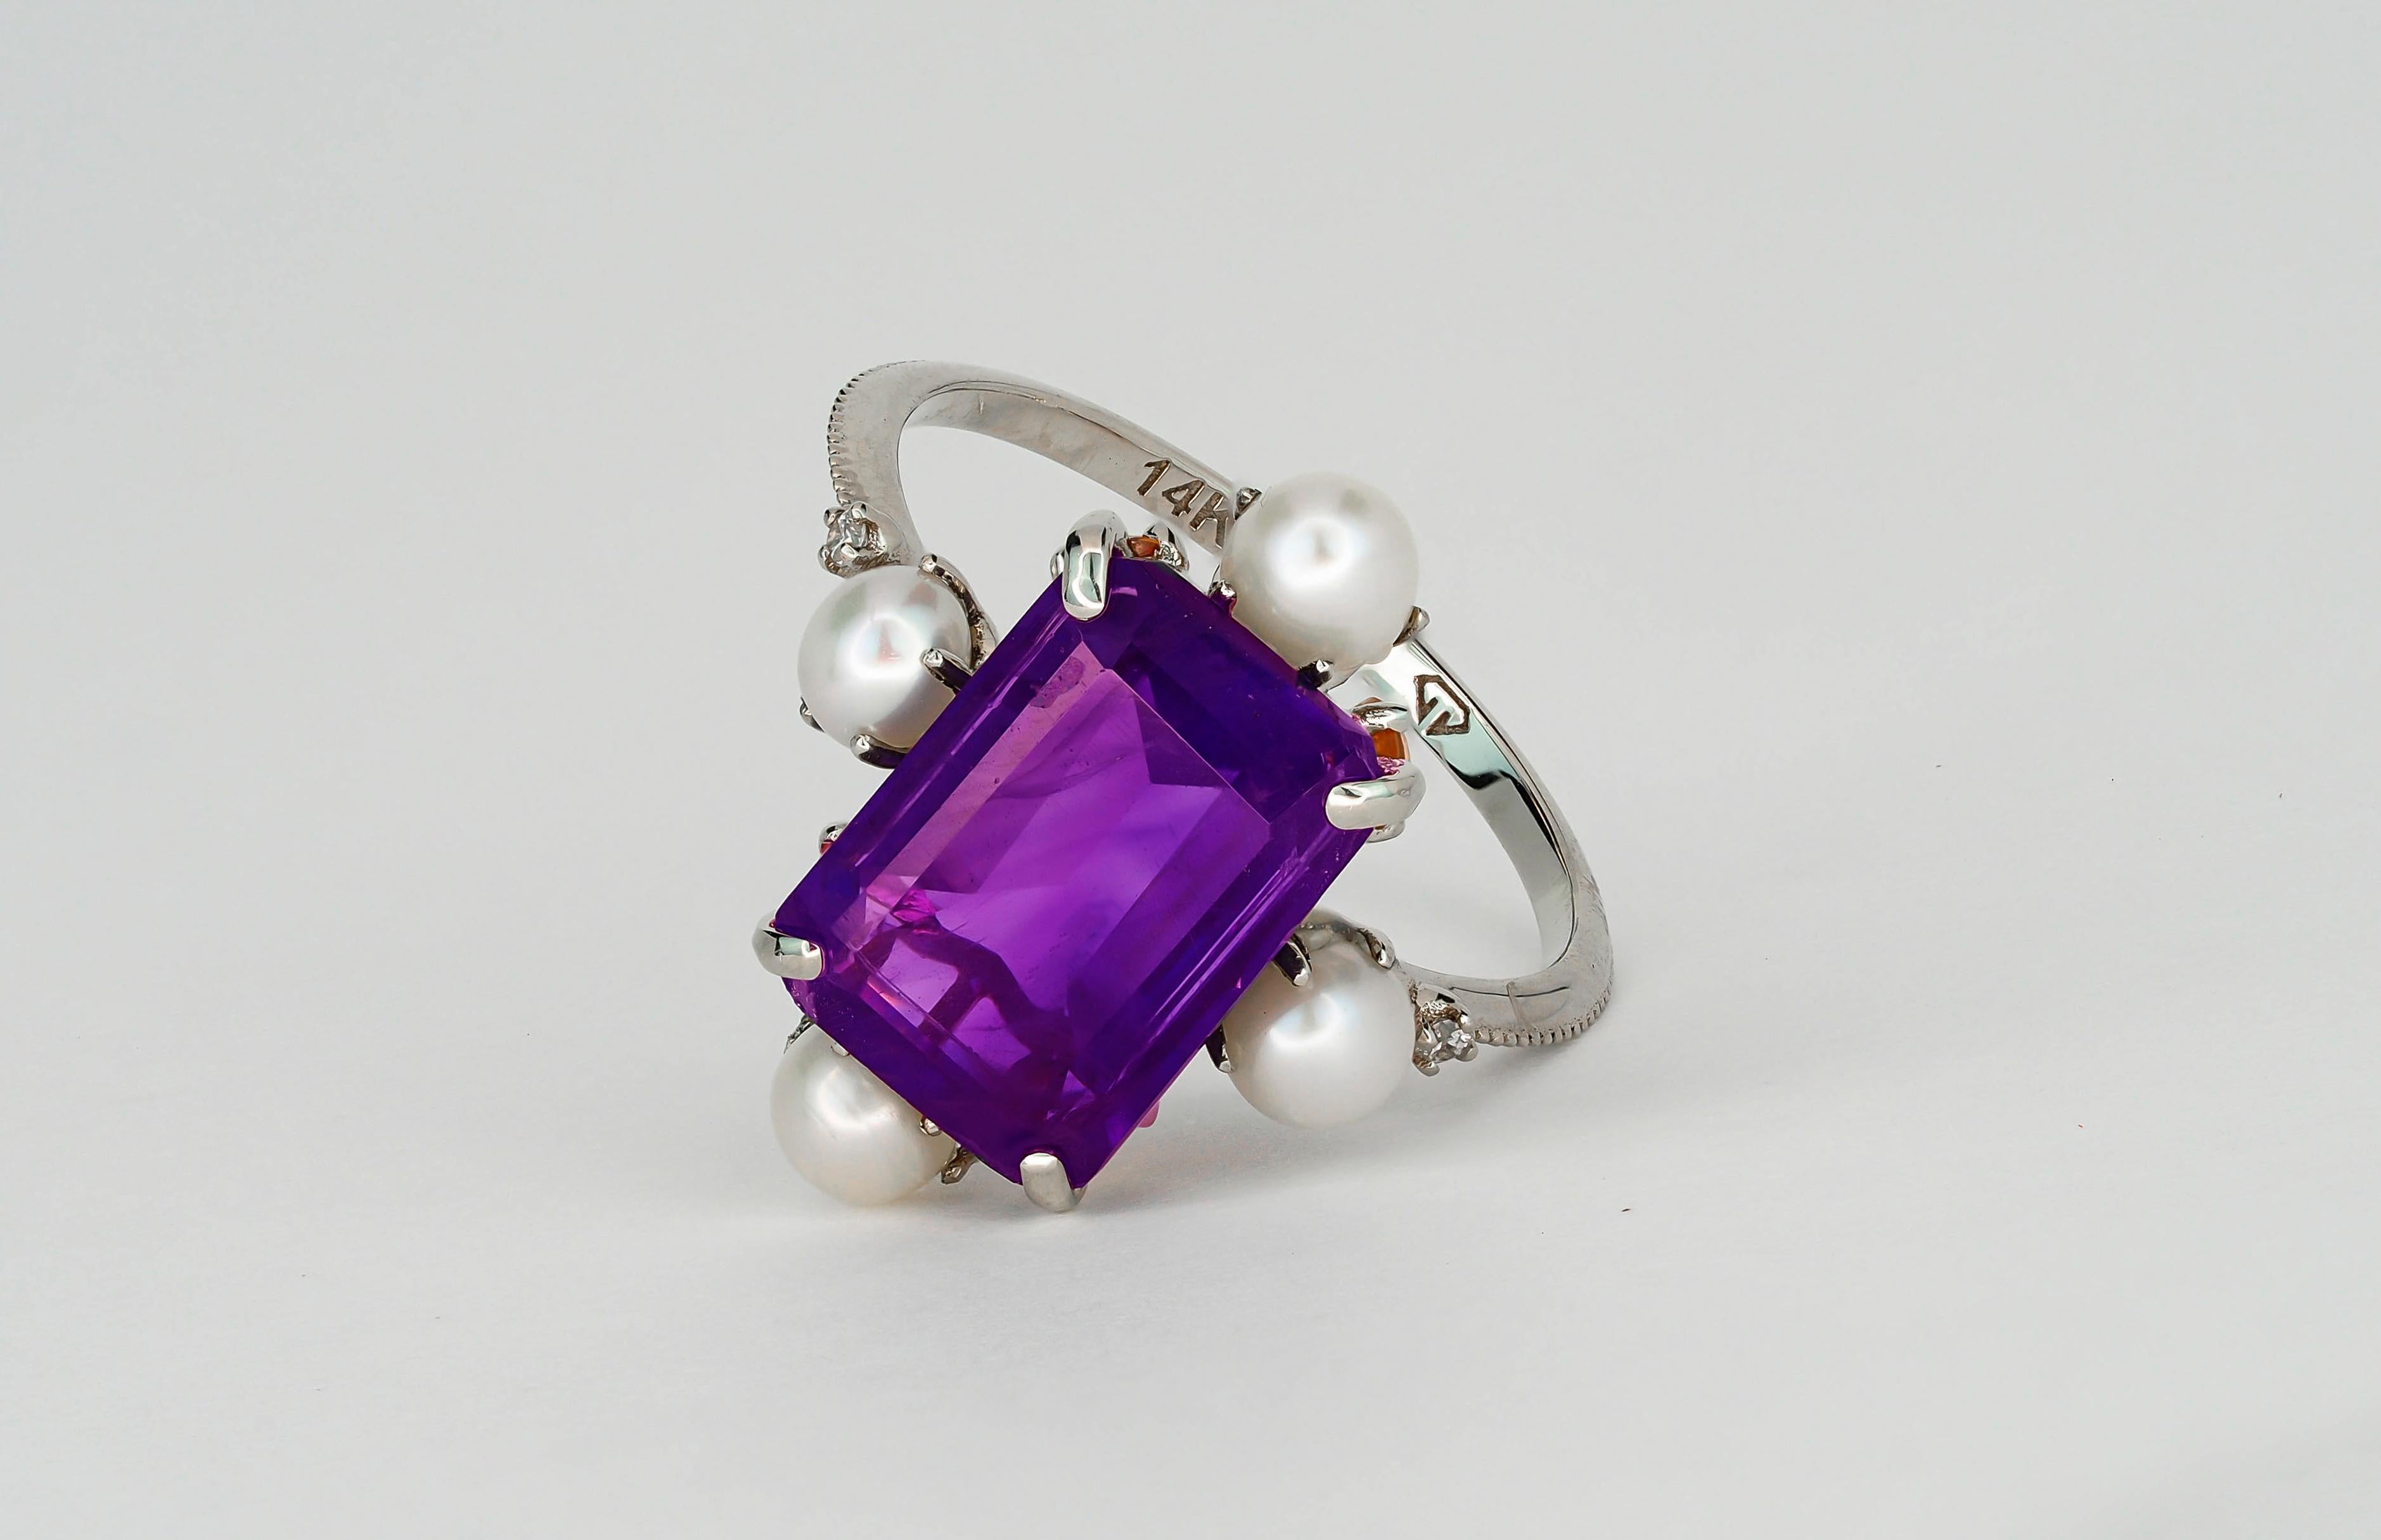 For Sale:  Amethyst ring in 14k gold.  4